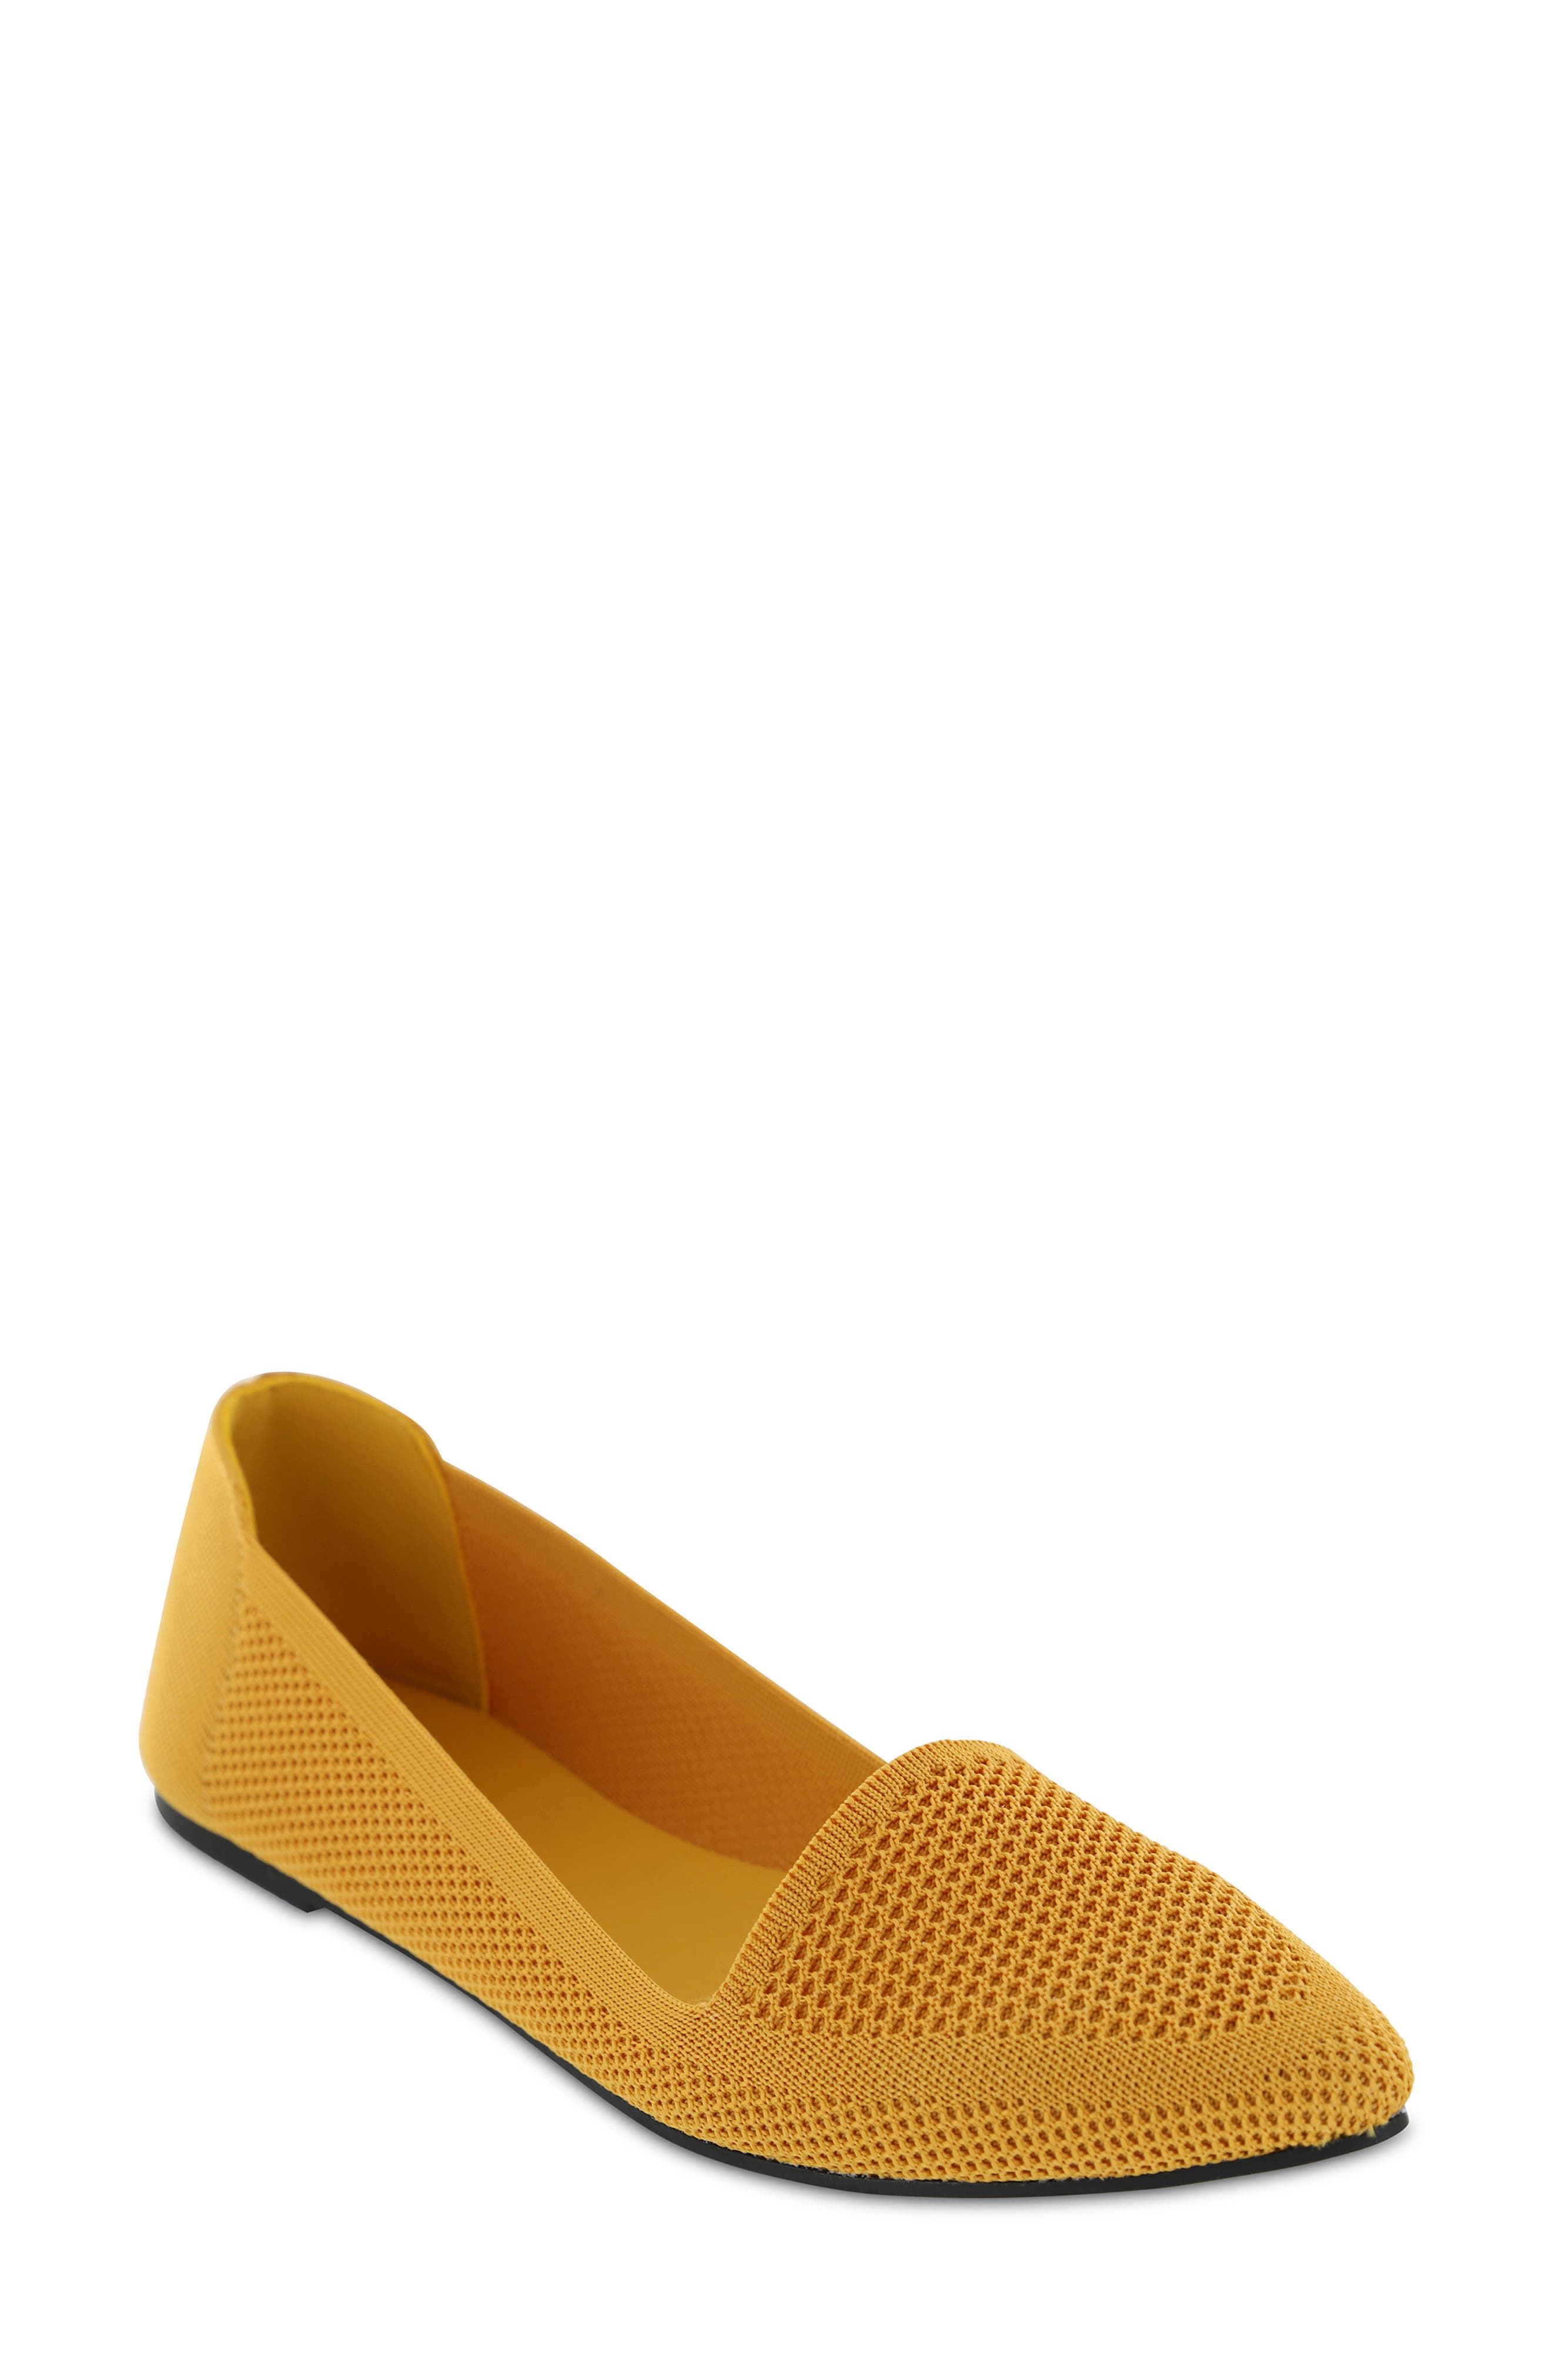 yellow pointed flats